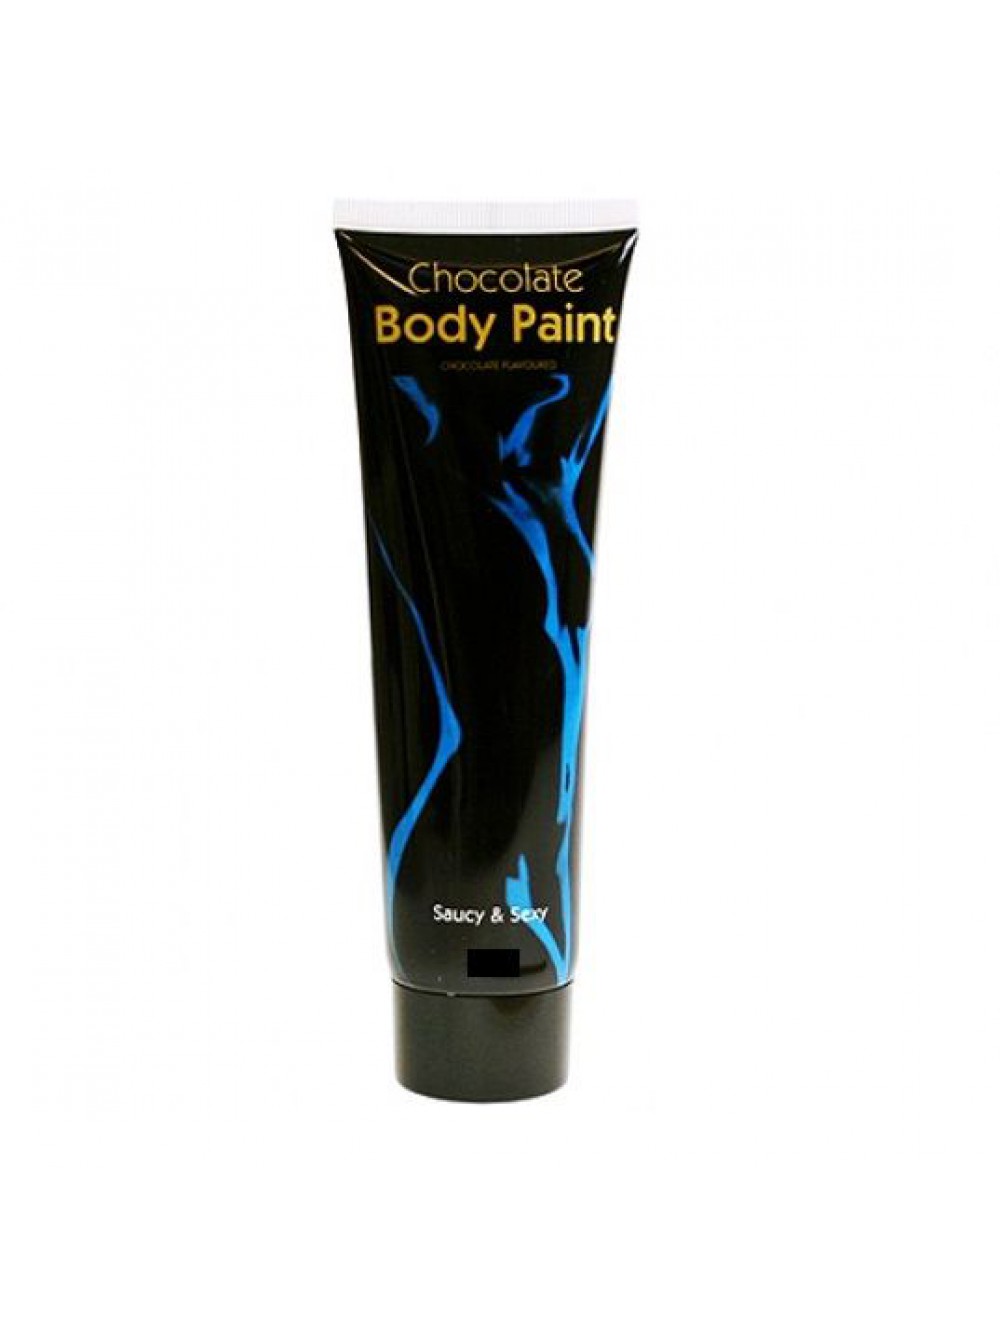 SPENCER AND FLETWOOD CHOCOLATE BODY PAINT 120GR. 5022782888619